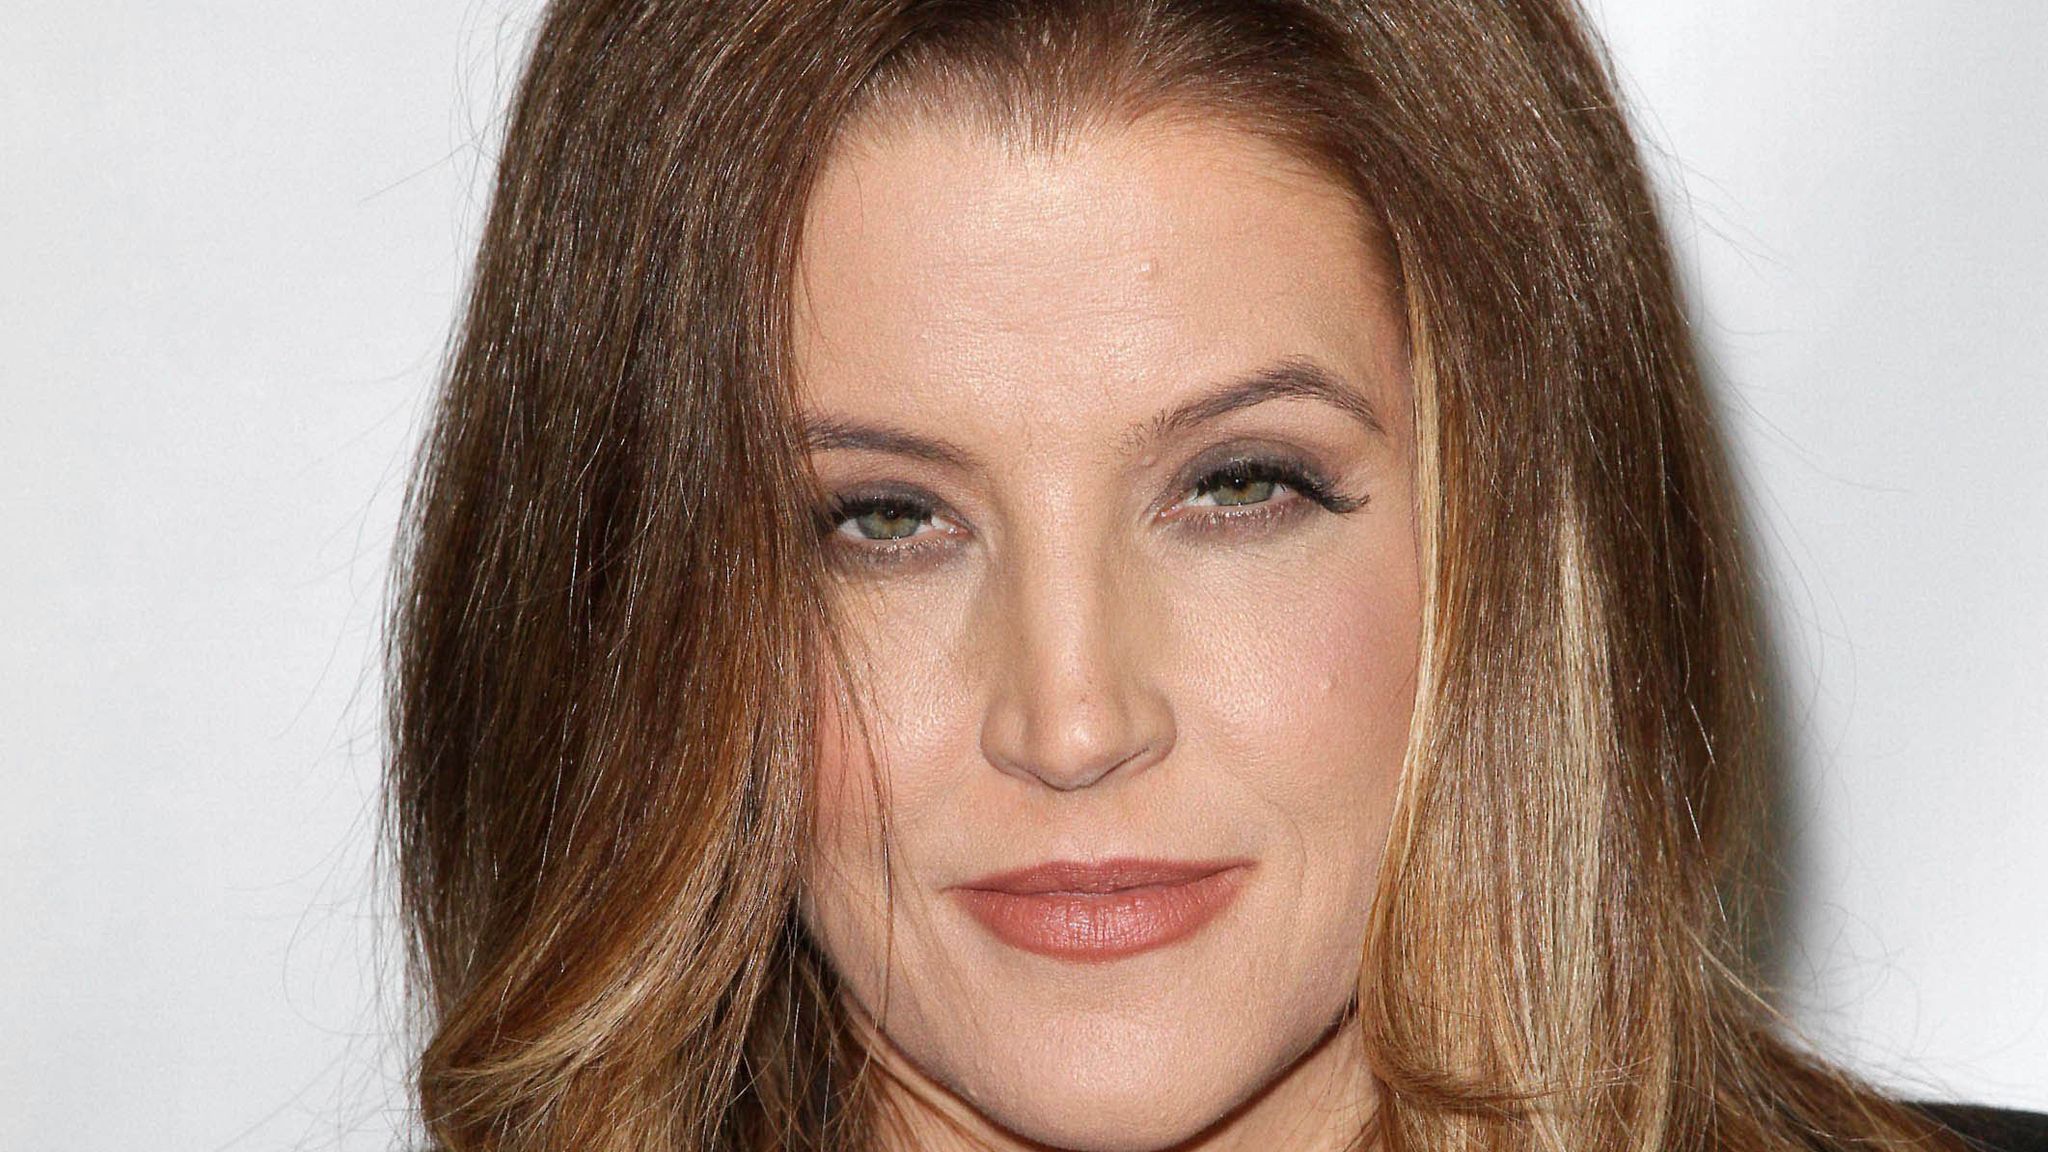 Lisa Marie Presley Singer Died Of Complications From Weight Loss Surgery